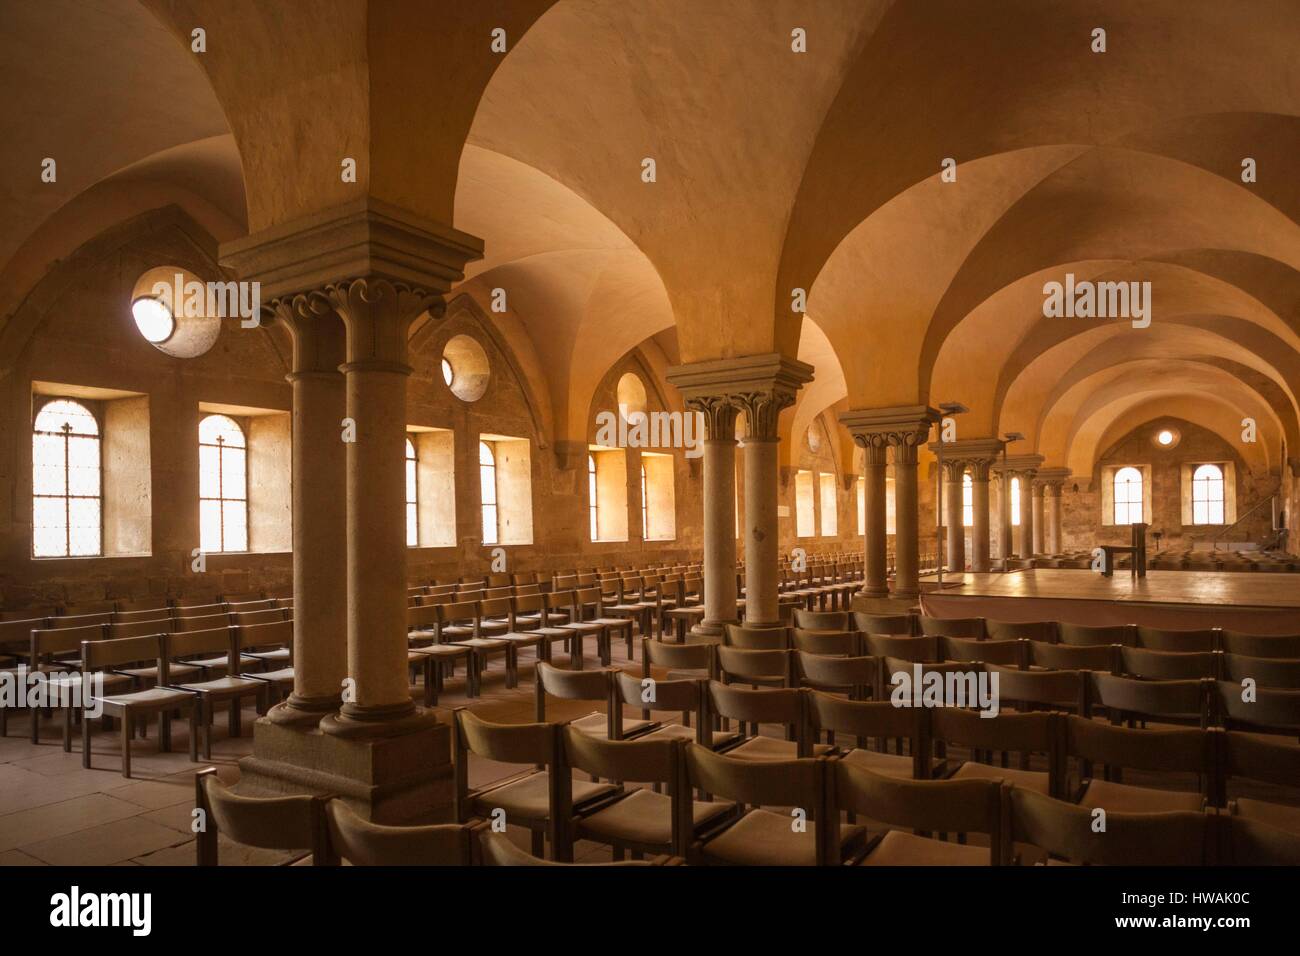 Germany, Baden-Wurttemburg, Maulbronn, Kloster Maulbronn Abbey, interior of the abbey dining hall Stock Photo